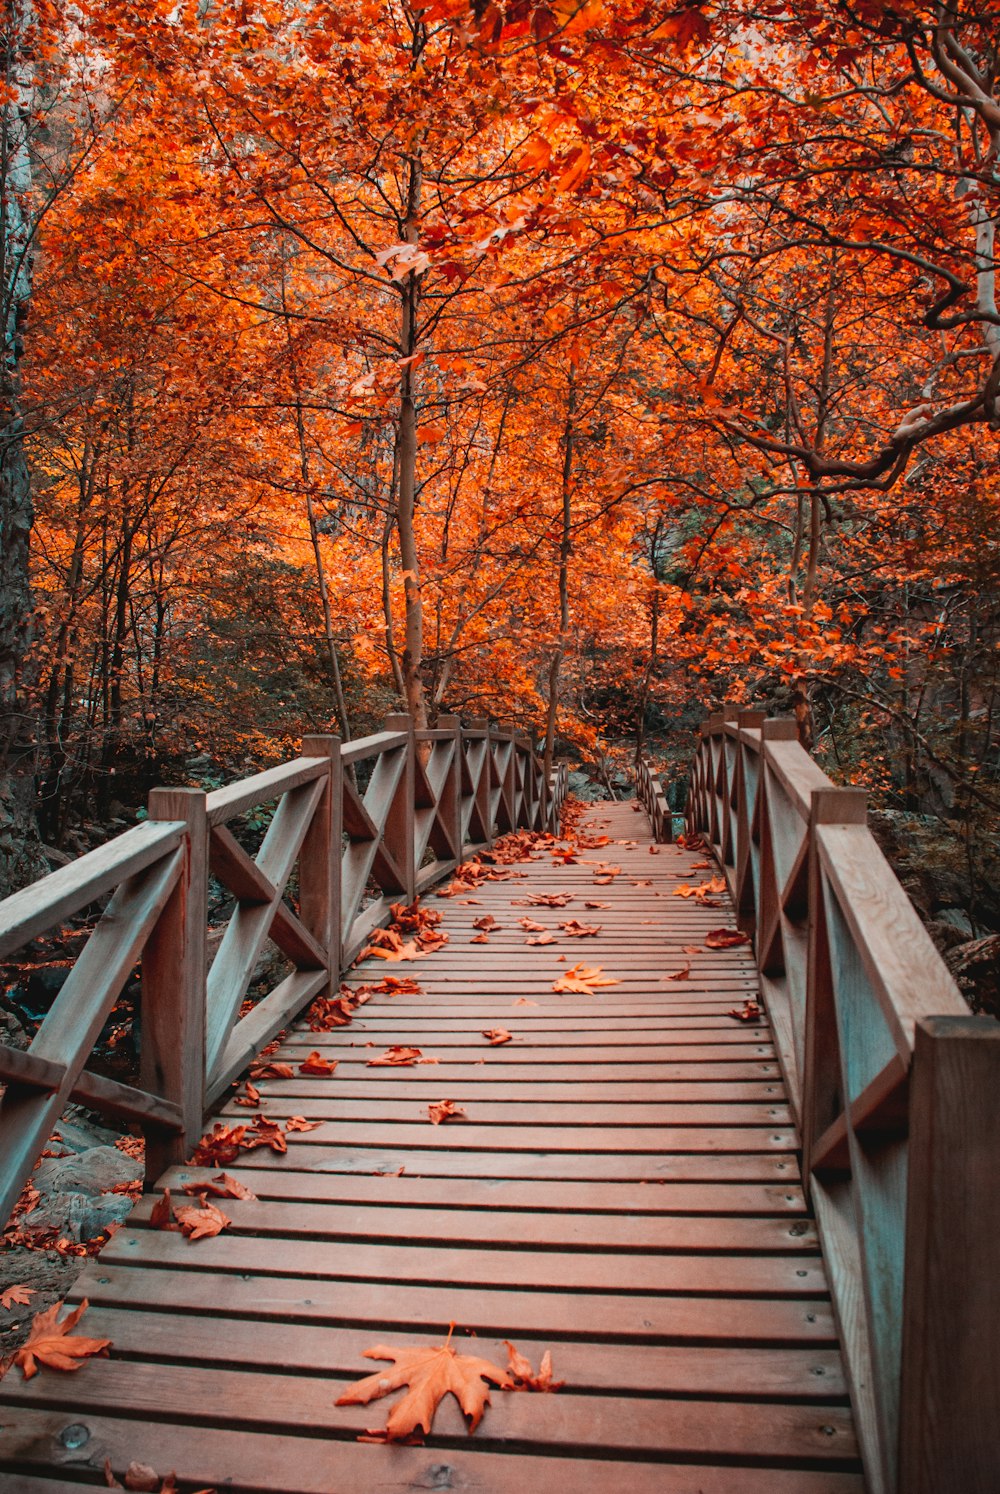 a wooden bridge surrounded by trees with orange leaves